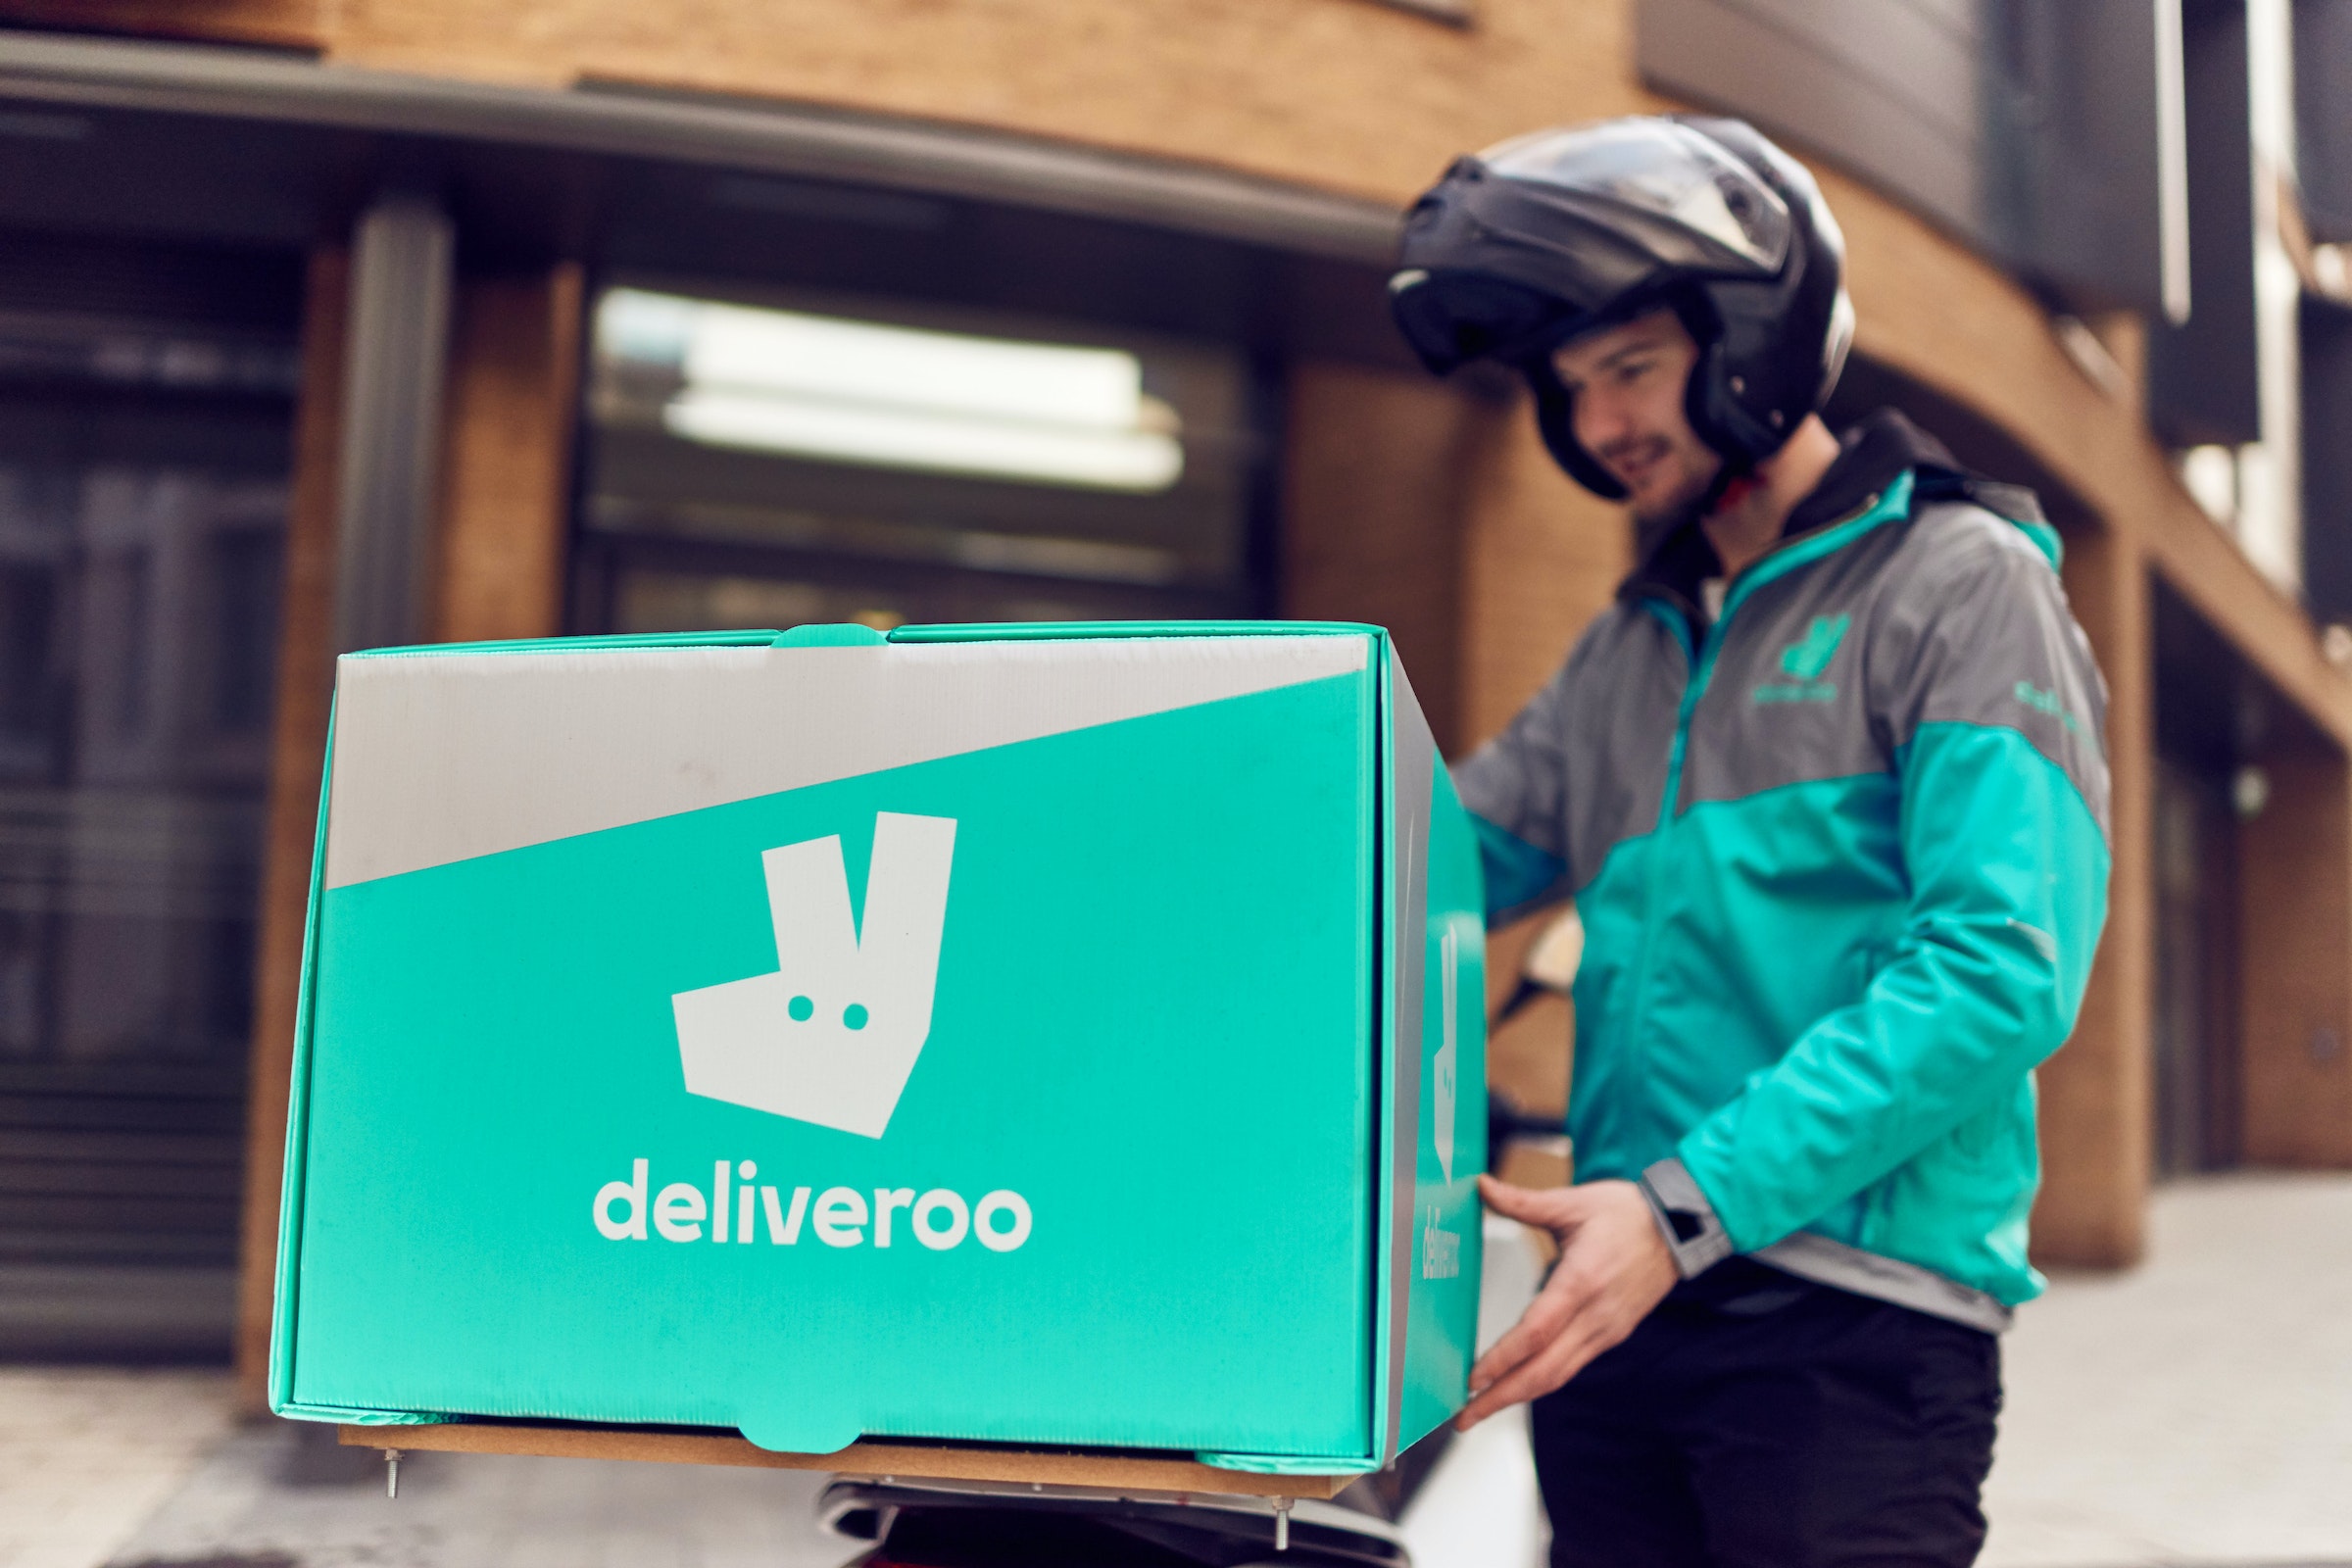 Deliveroo Dumbarton: Delivery workers needed as food service arrives